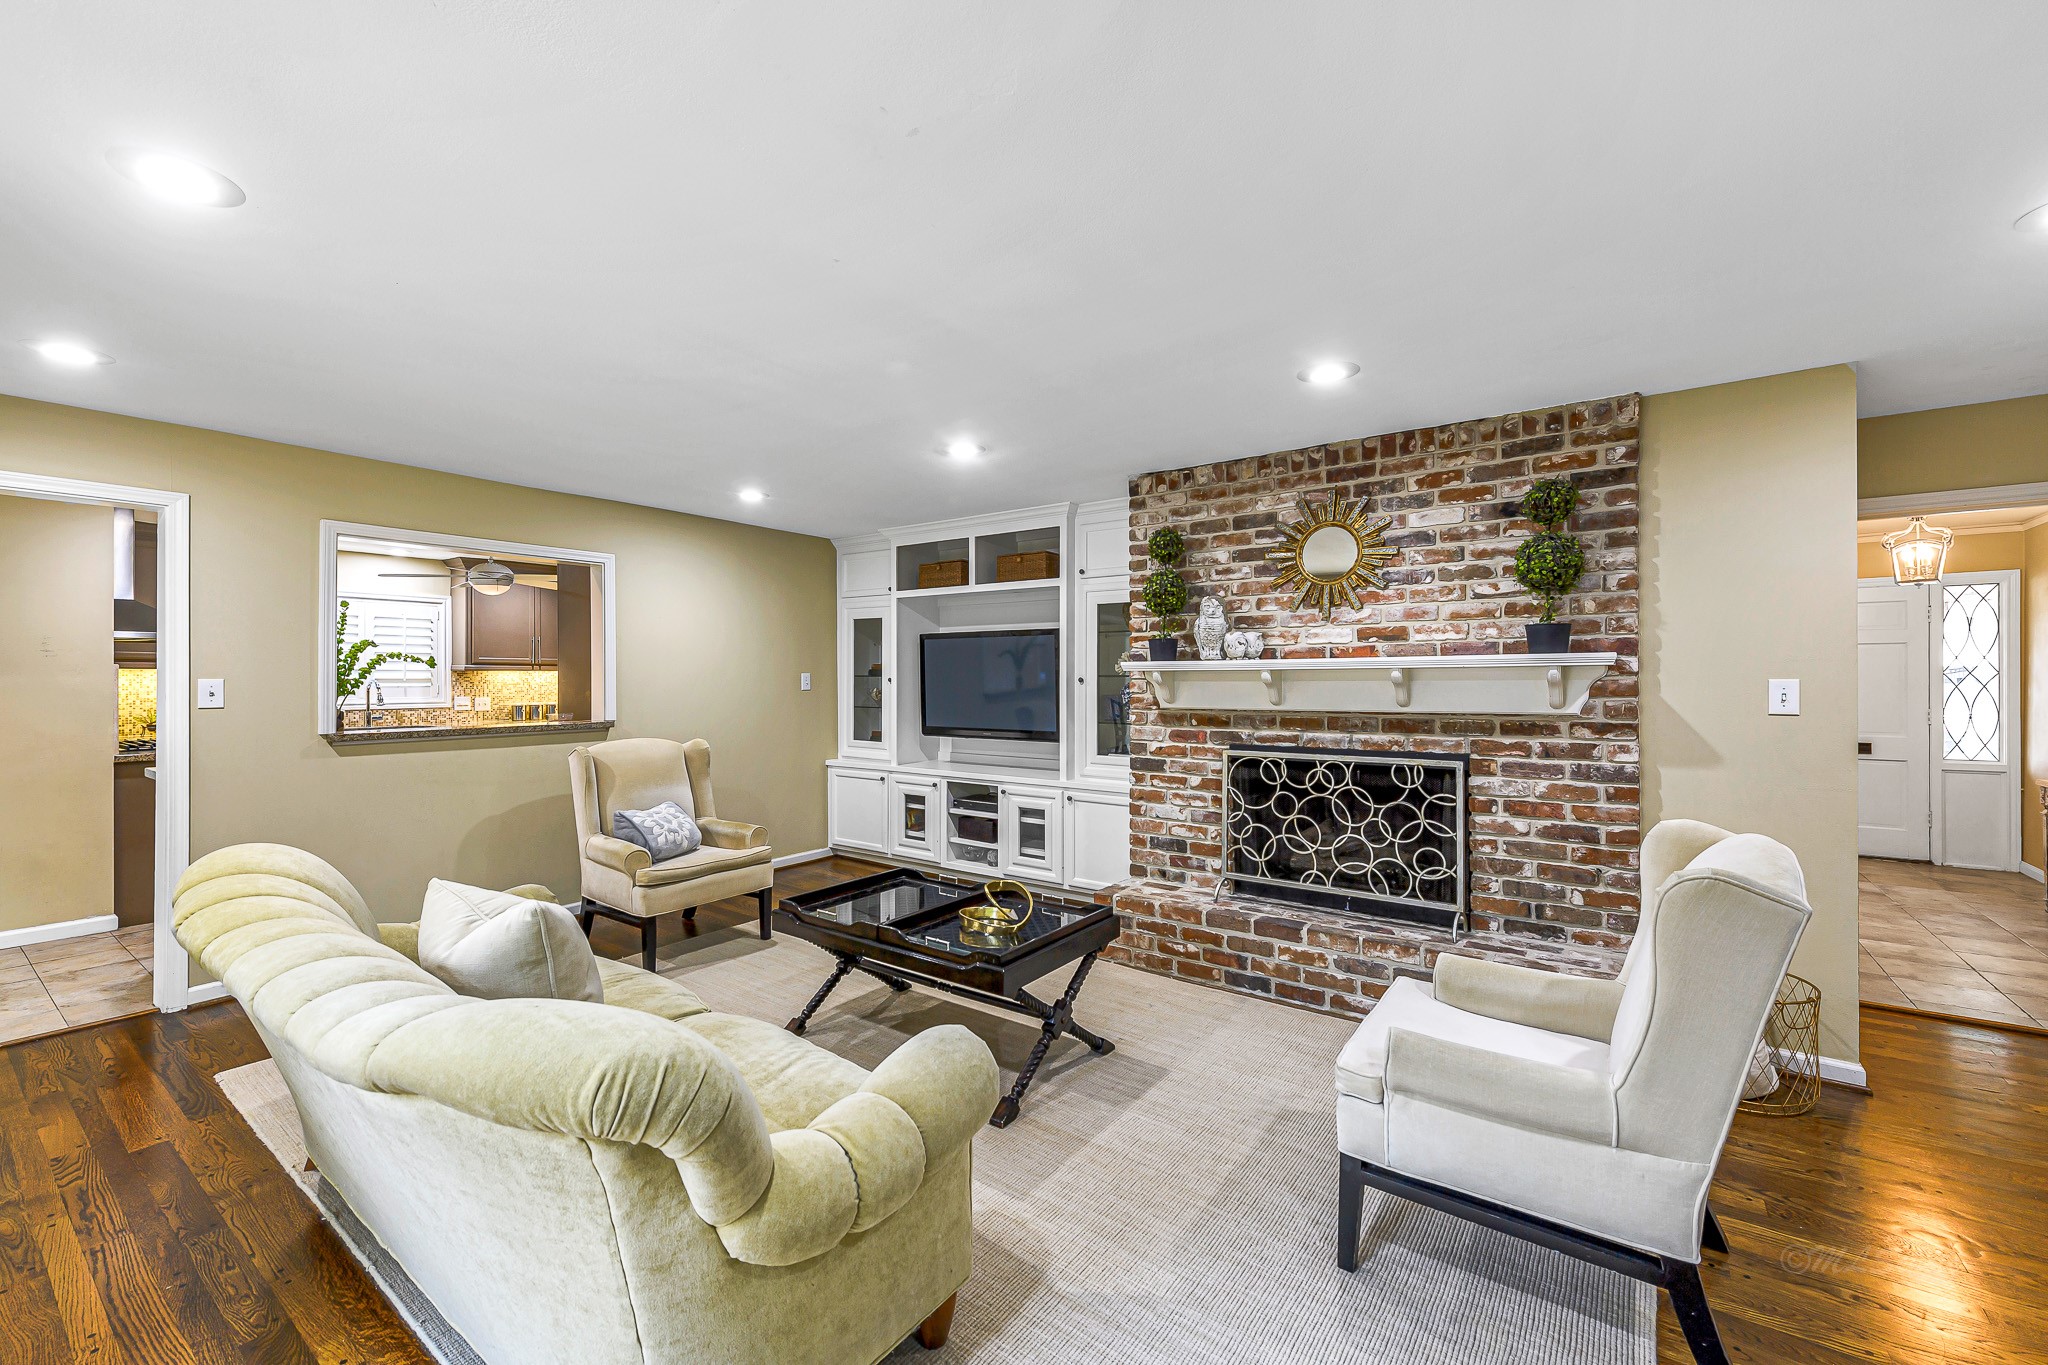 This space is adorned with a gas log brick fireplace, a warm and inviting paint palette, custom built-ins, and luxurious wood flooring, creating an ambiance that's perfect for relaxation and gatherings.